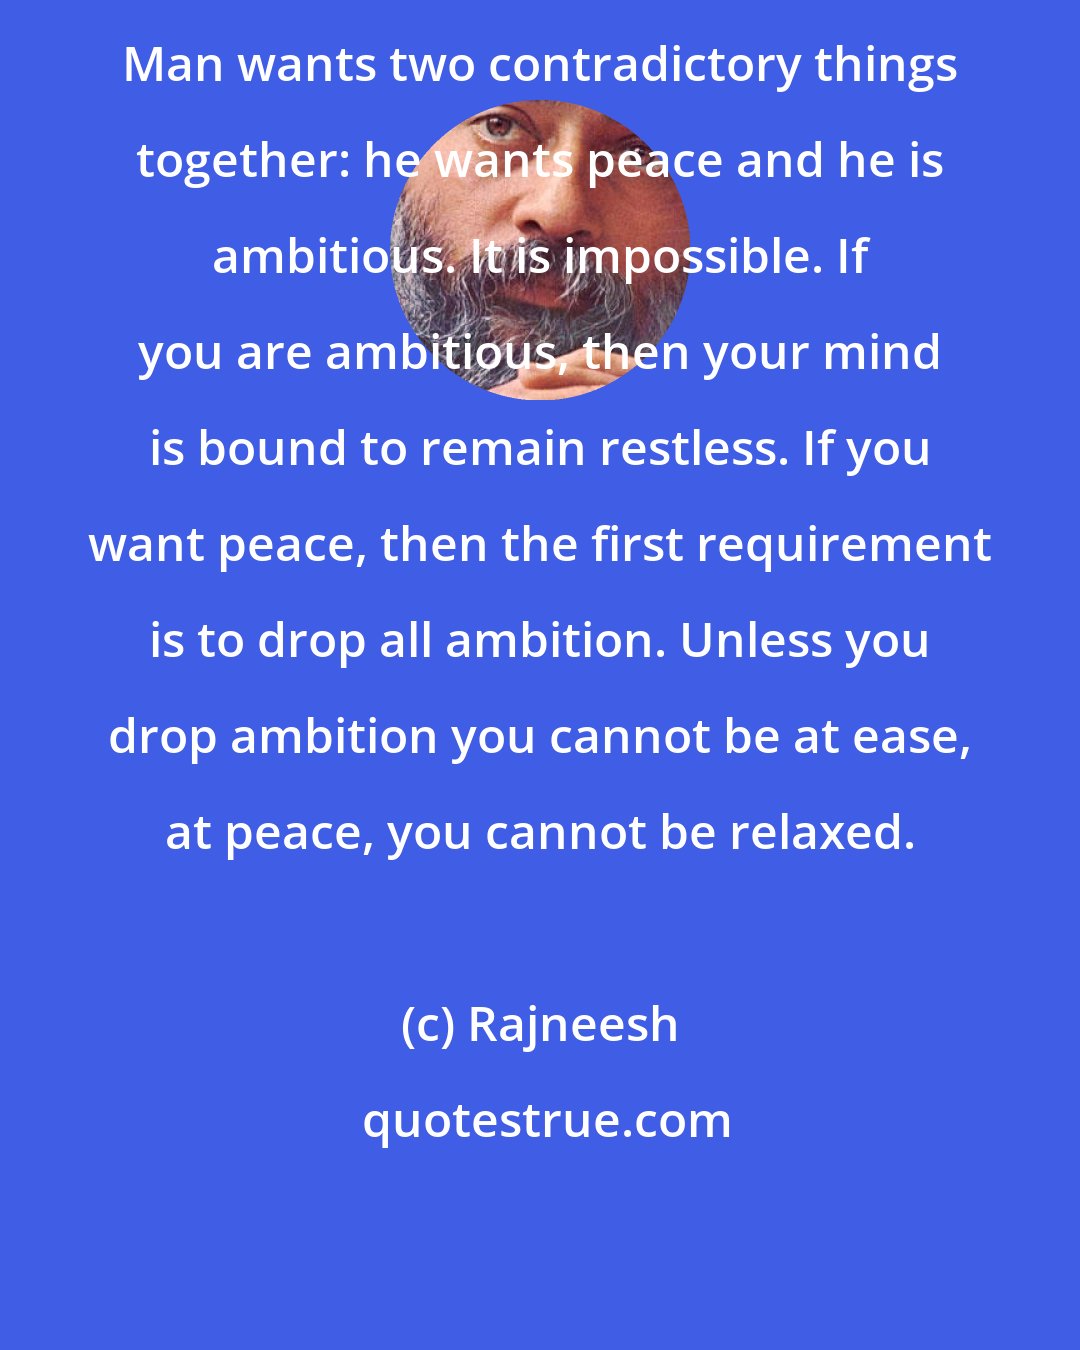 Rajneesh: Man wants two contradictory things together: he wants peace and he is ambitious. It is impossible. If you are ambitious, then your mind is bound to remain restless. If you want peace, then the first requirement is to drop all ambition. Unless you drop ambition you cannot be at ease, at peace, you cannot be relaxed.